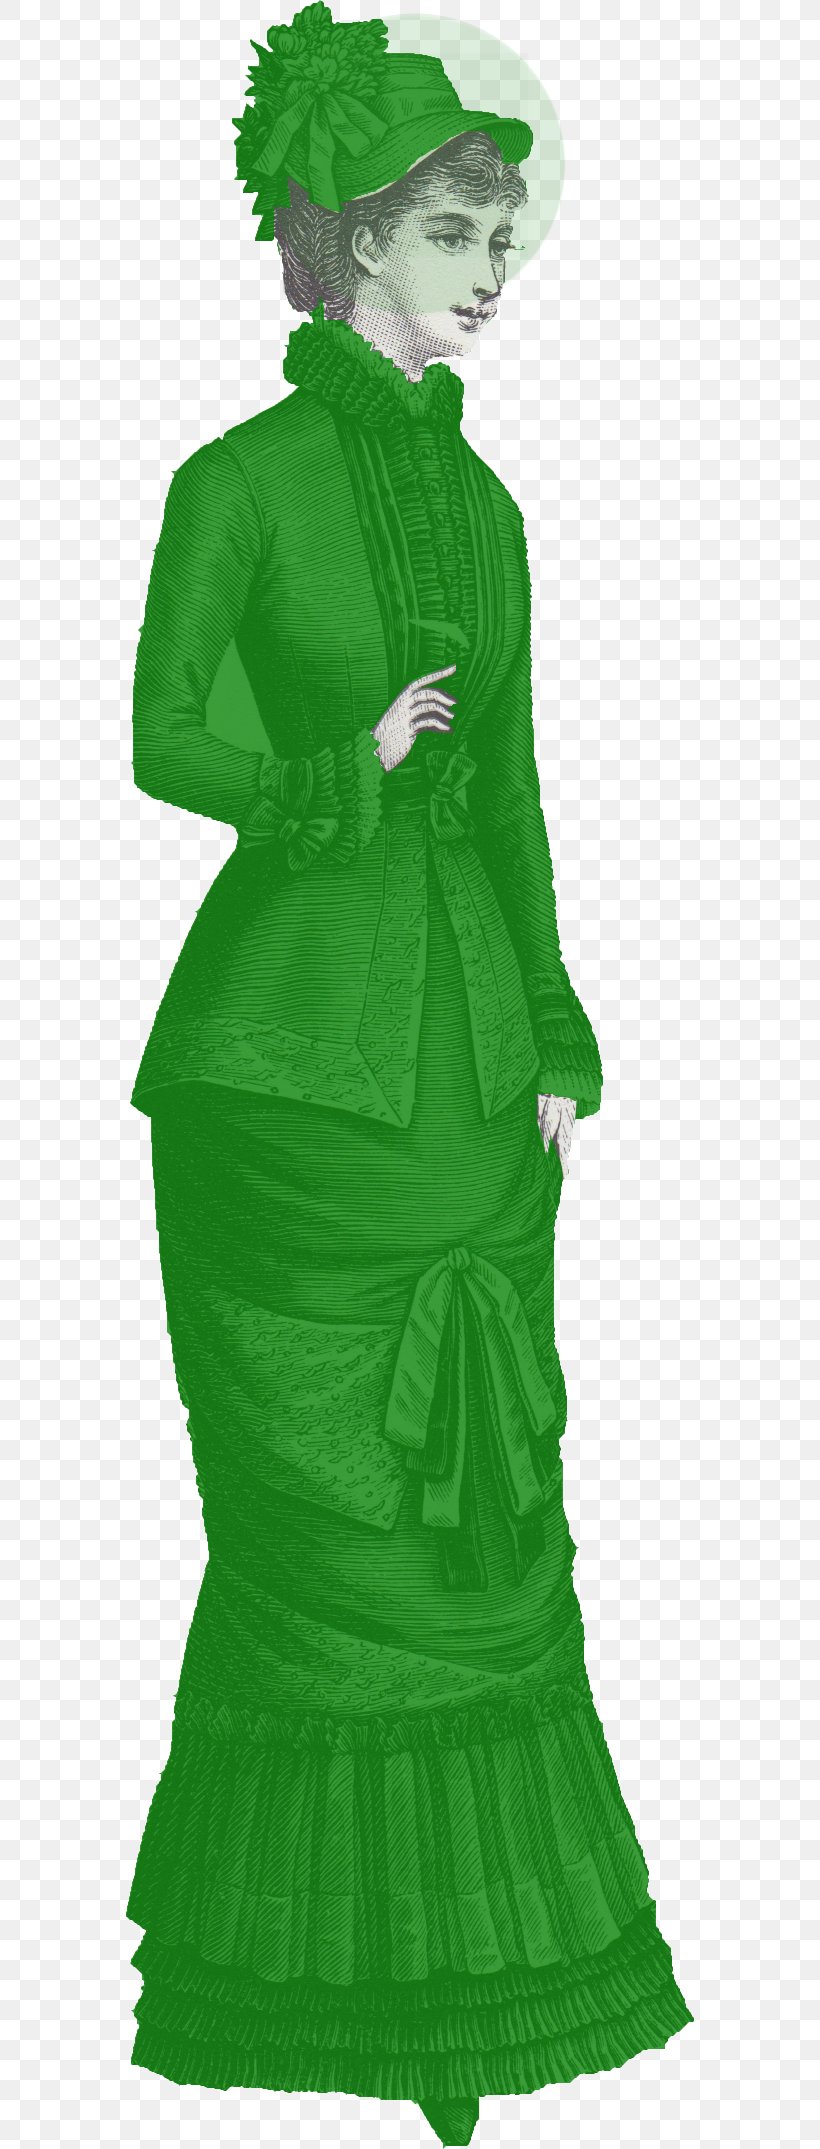 Christmas Tree Costume Design Green, PNG, 568x2149px, Christmas Tree, Christmas, Costume, Costume Design, Day Dress Download Free